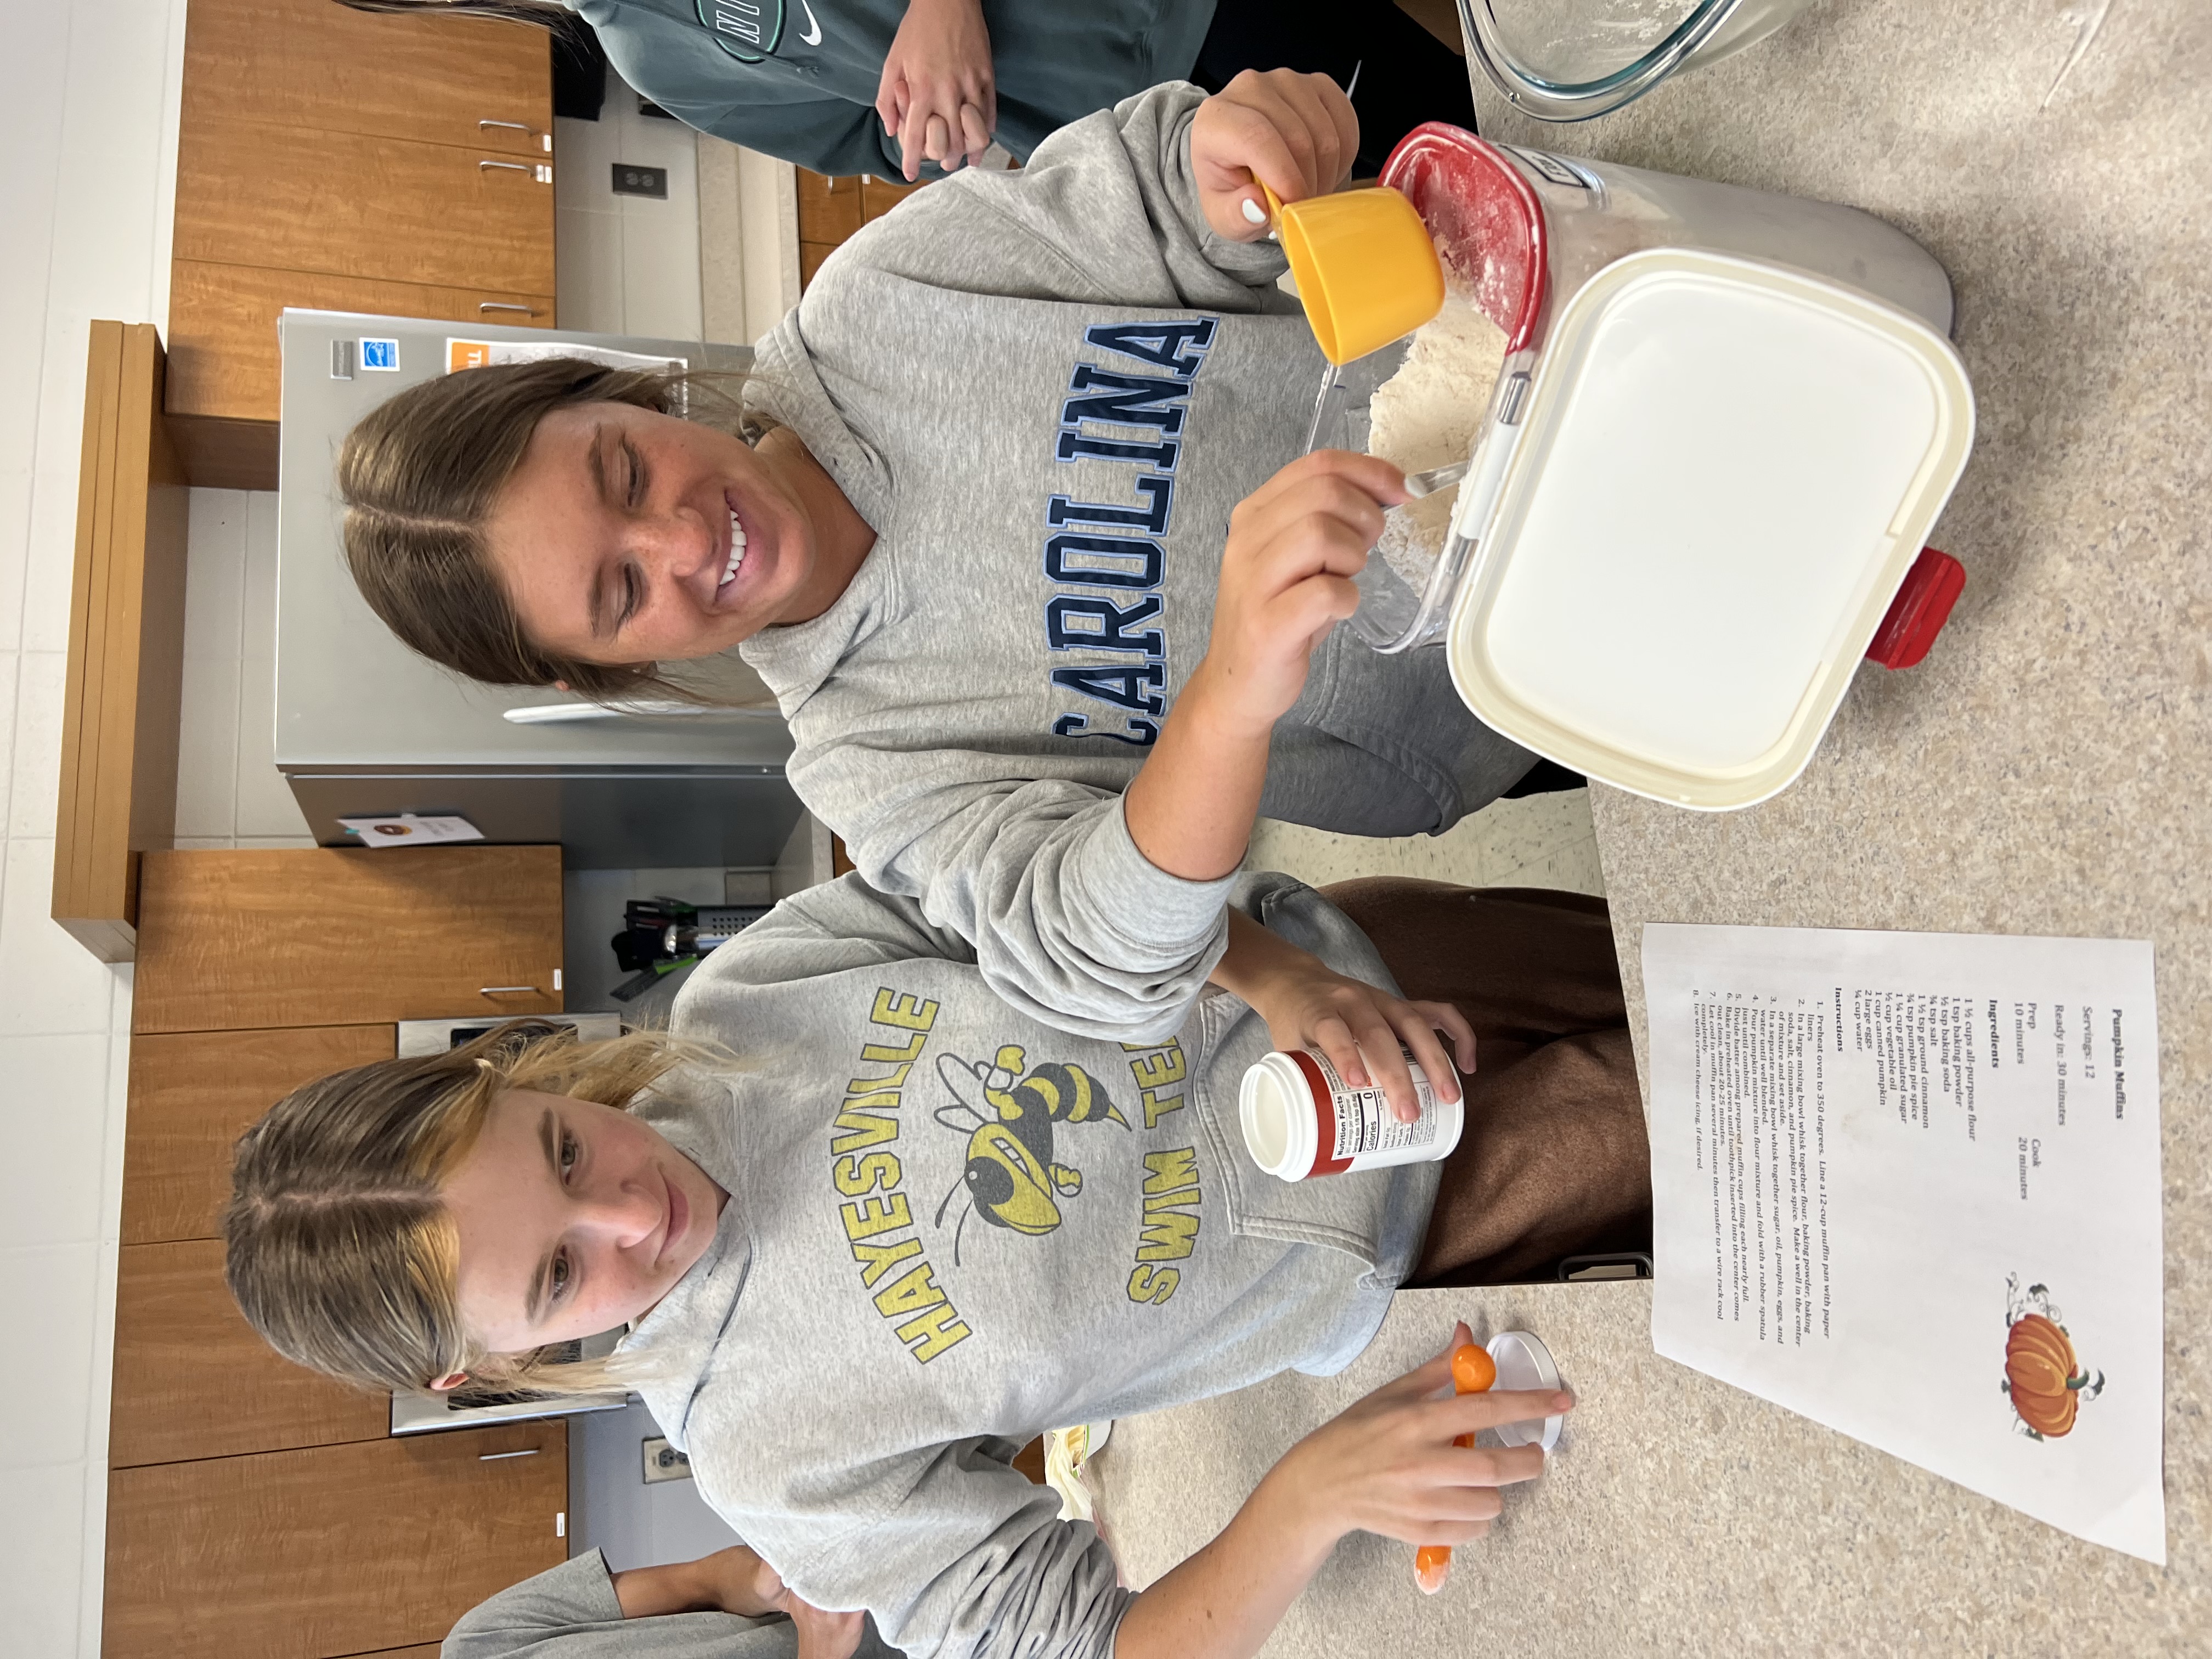 Students measure dry ingredients for use in baking.